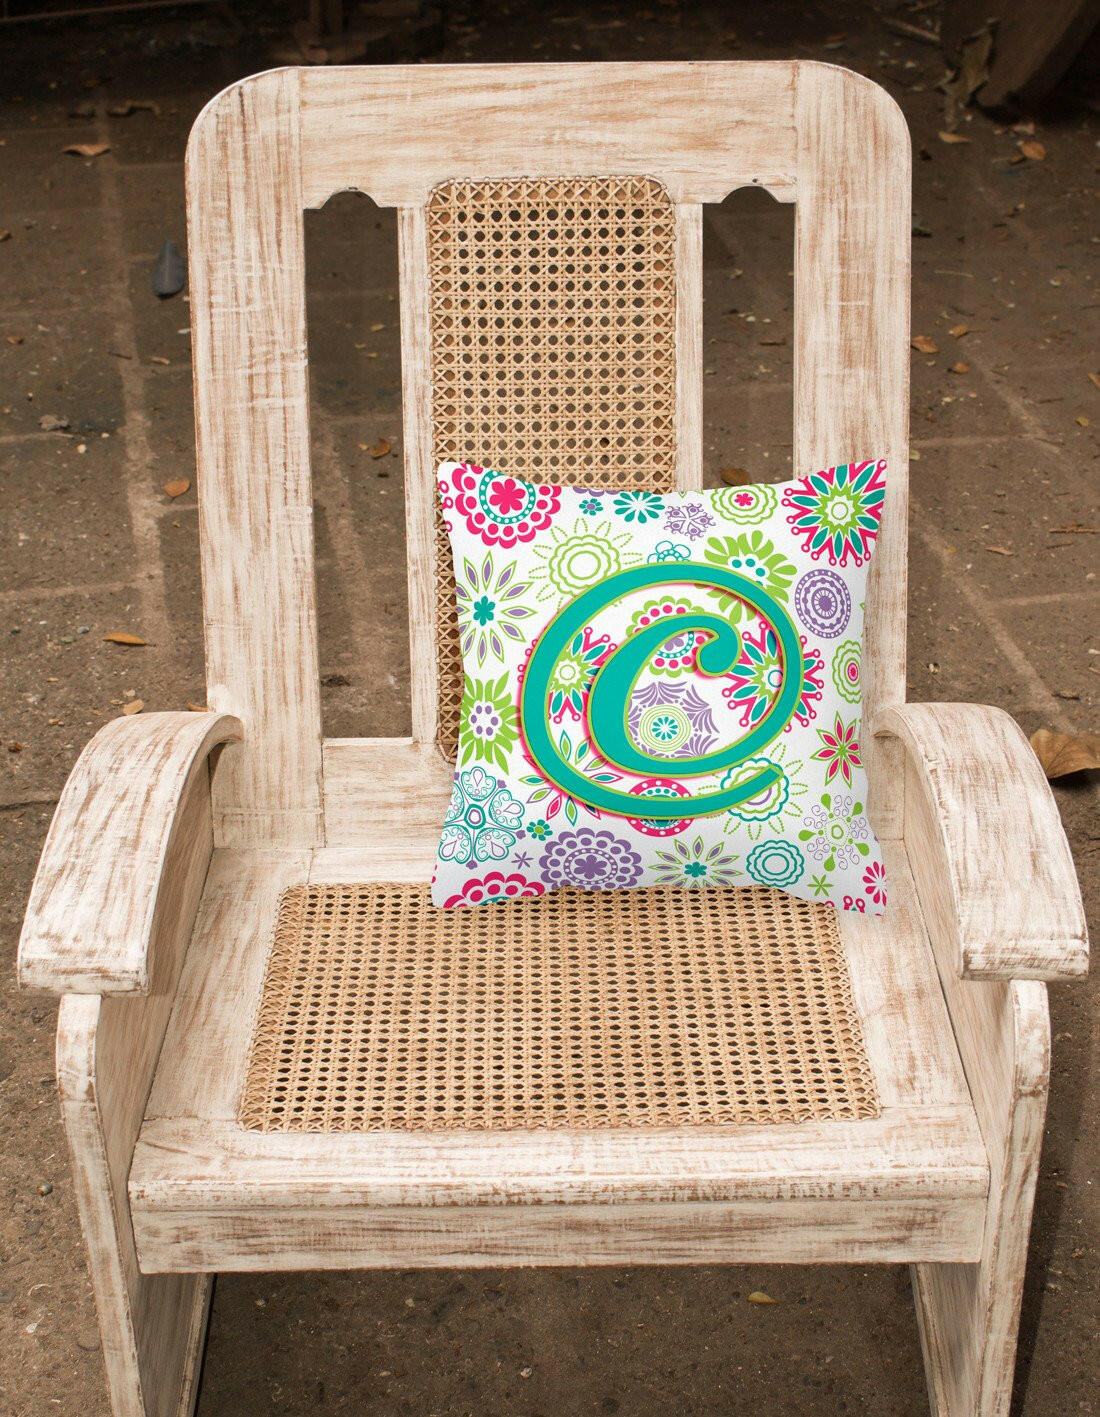 Letter C Flowers Pink Teal Green Initial Canvas Fabric Decorative Pillow CJ2011-CPW1414 by Caroline's Treasures